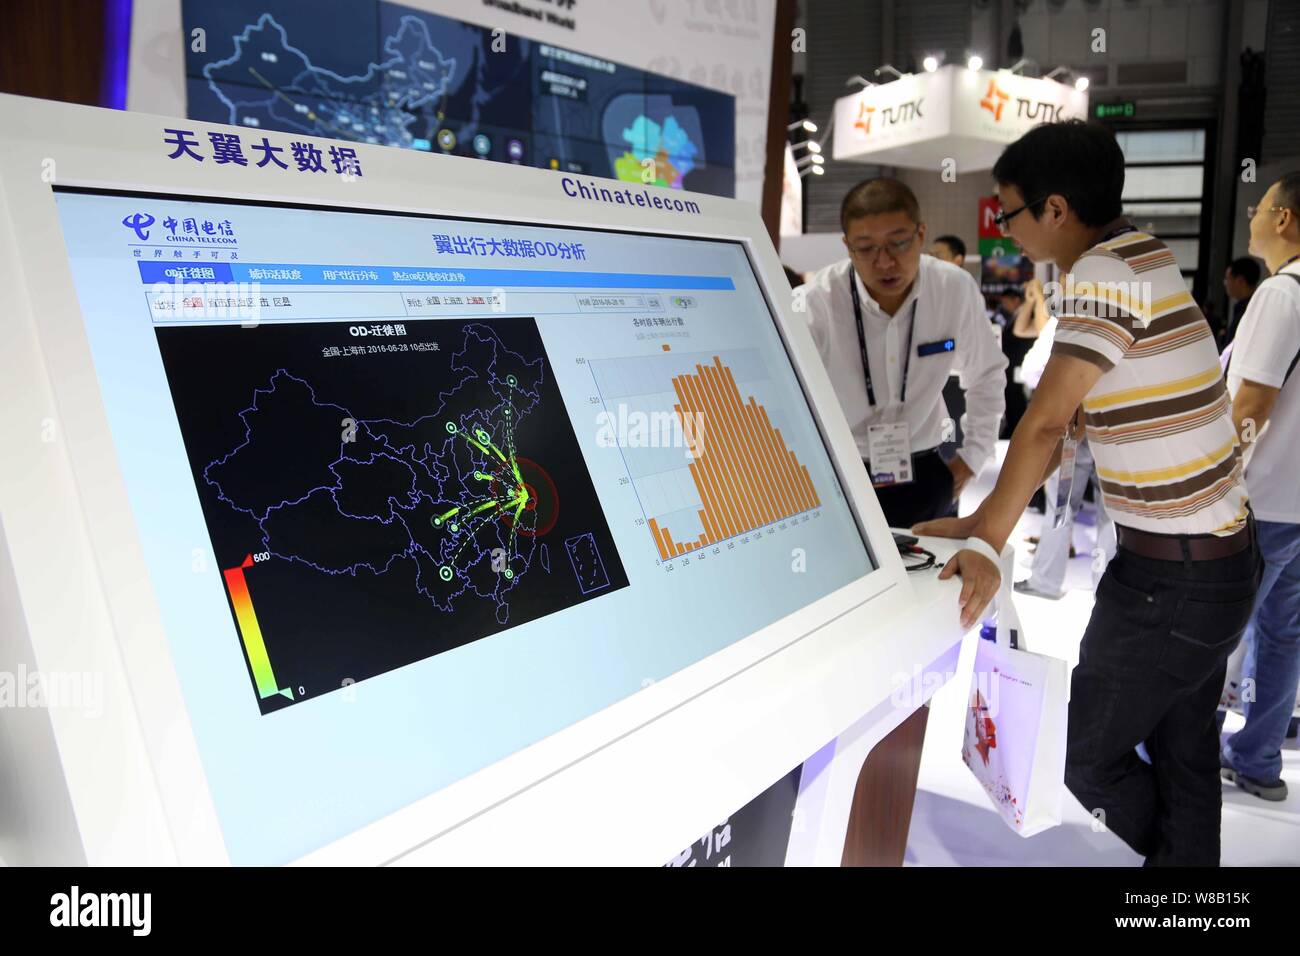 A screen showing big data analysis is on display at the stand of China Telecom during the 2016 Mobile World Congress (MWC) in Shanghai, China, 29 June Stock Photo